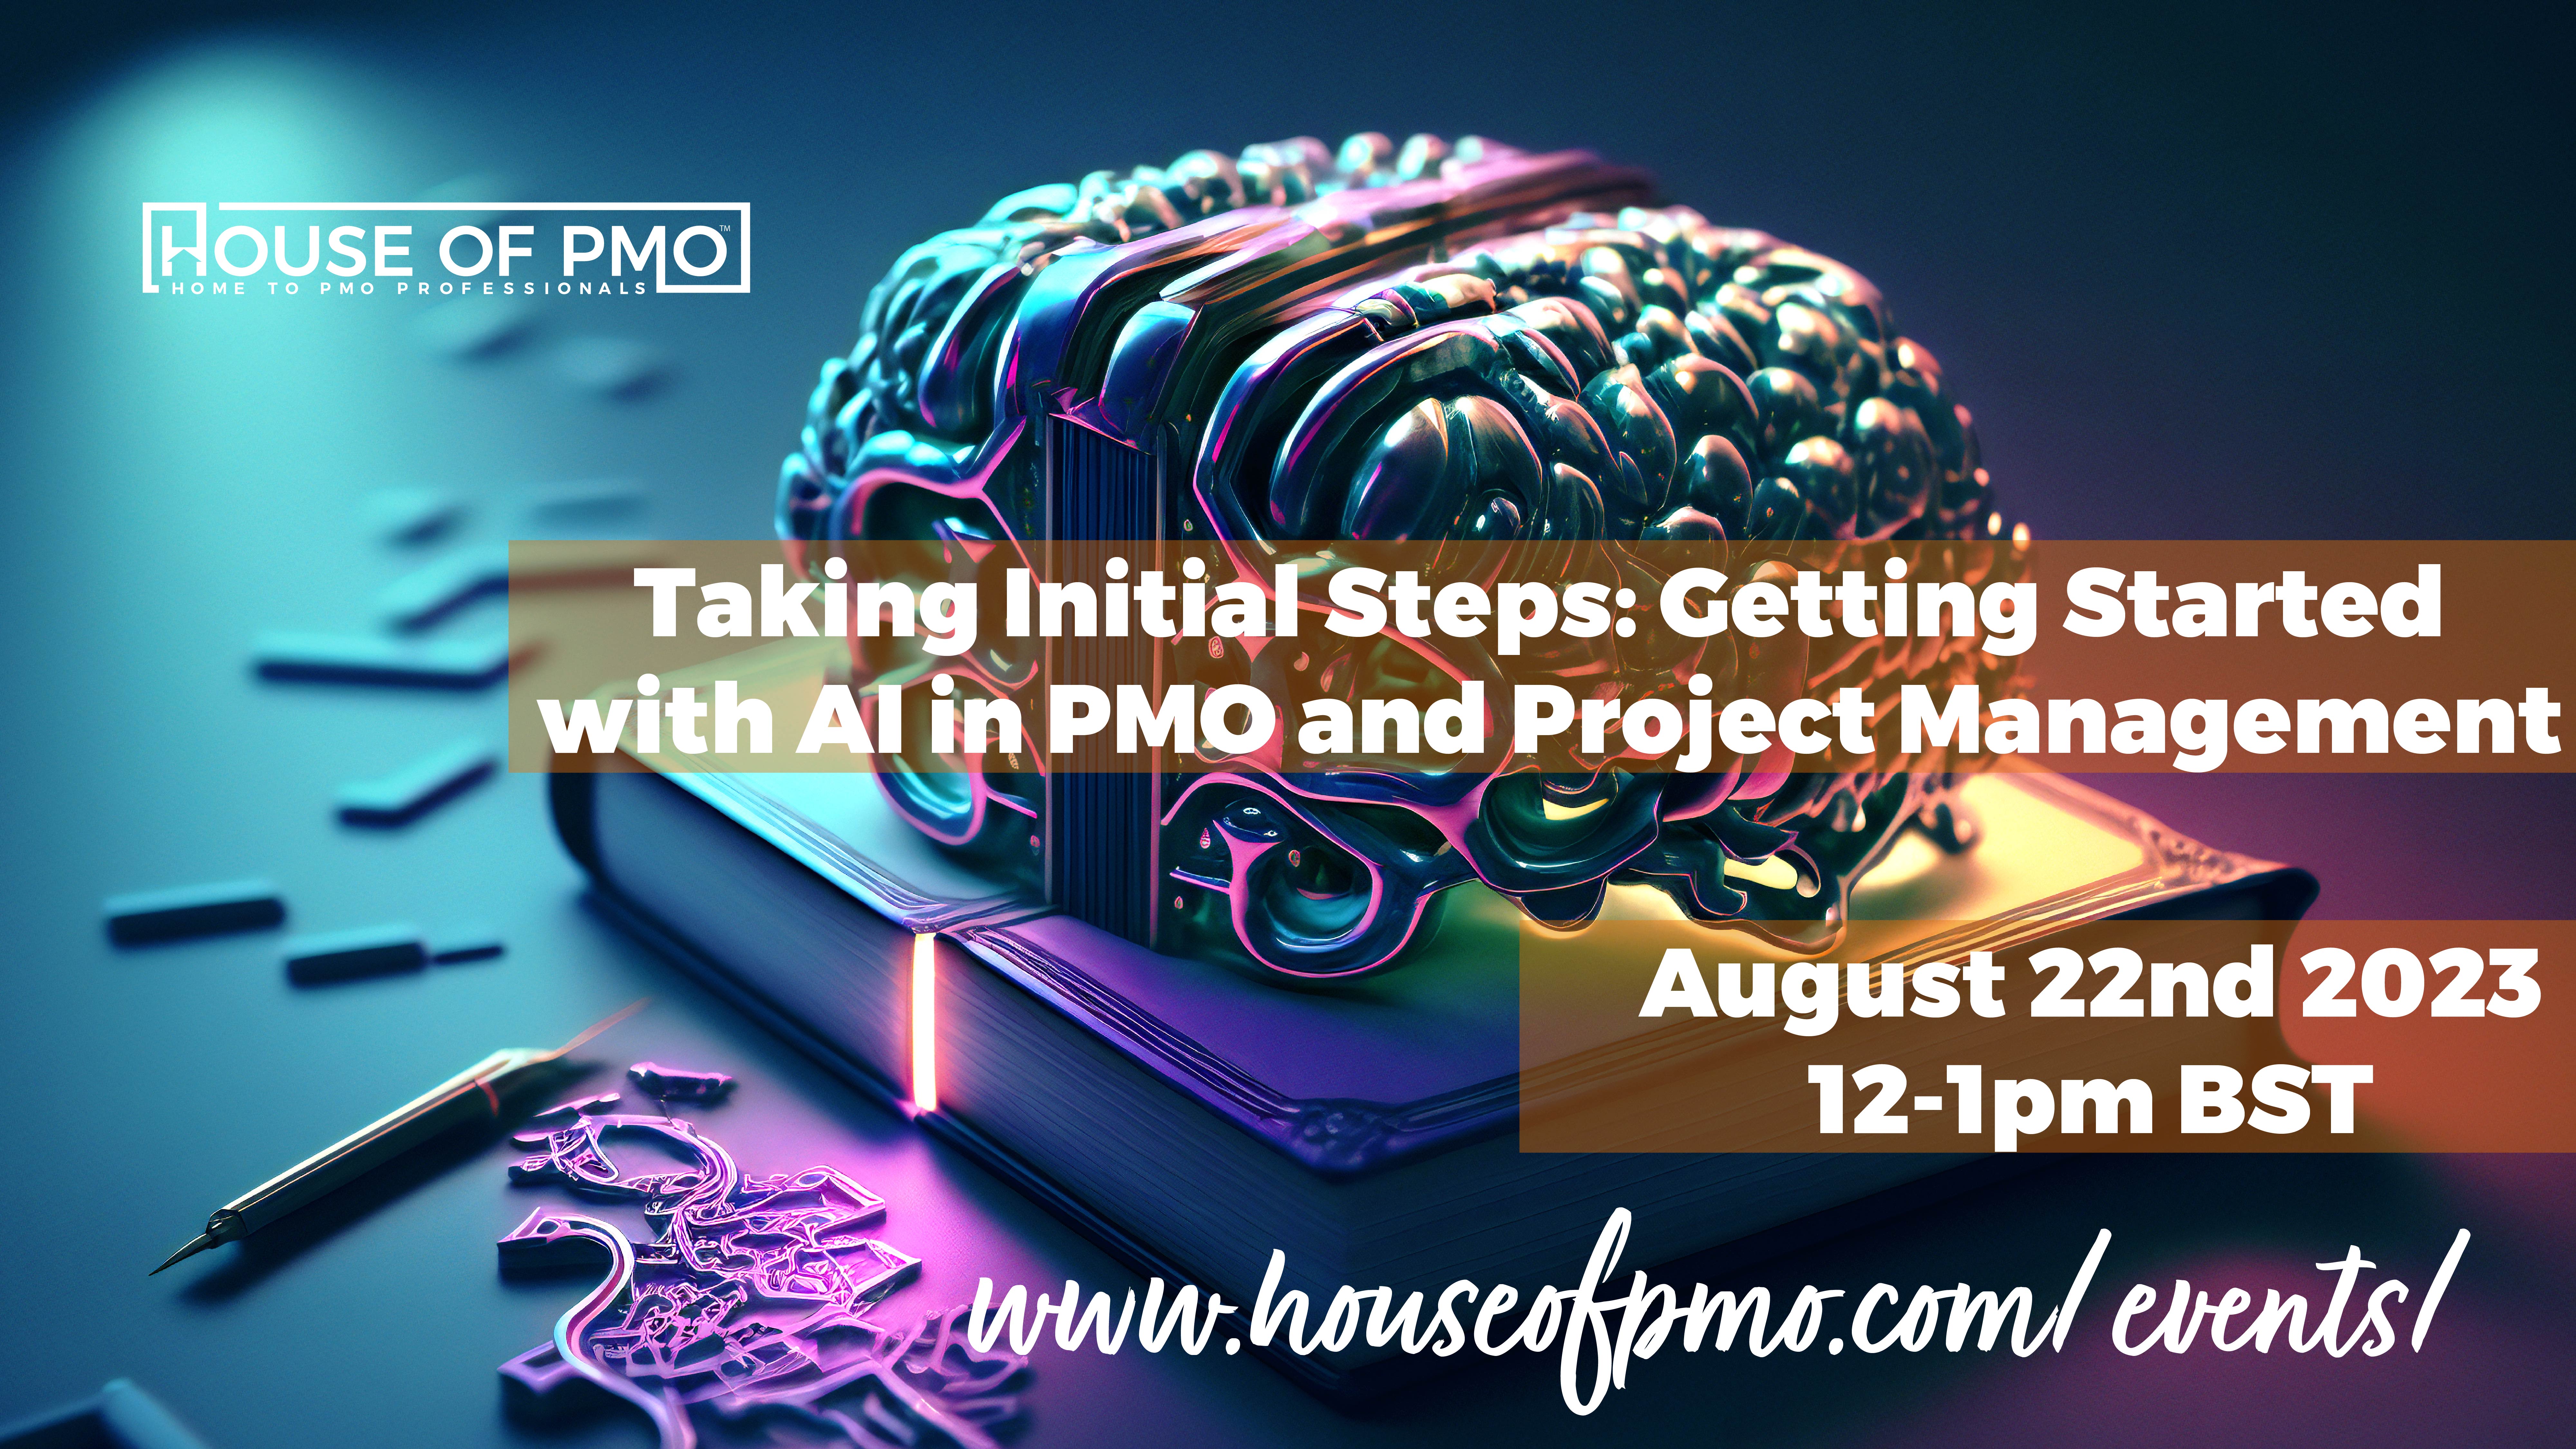 Image for the event taking initial steps getting started with AI in PMO and project management. It shows a technology made brain on top of a book to symbolise knowledge becoming tech centered